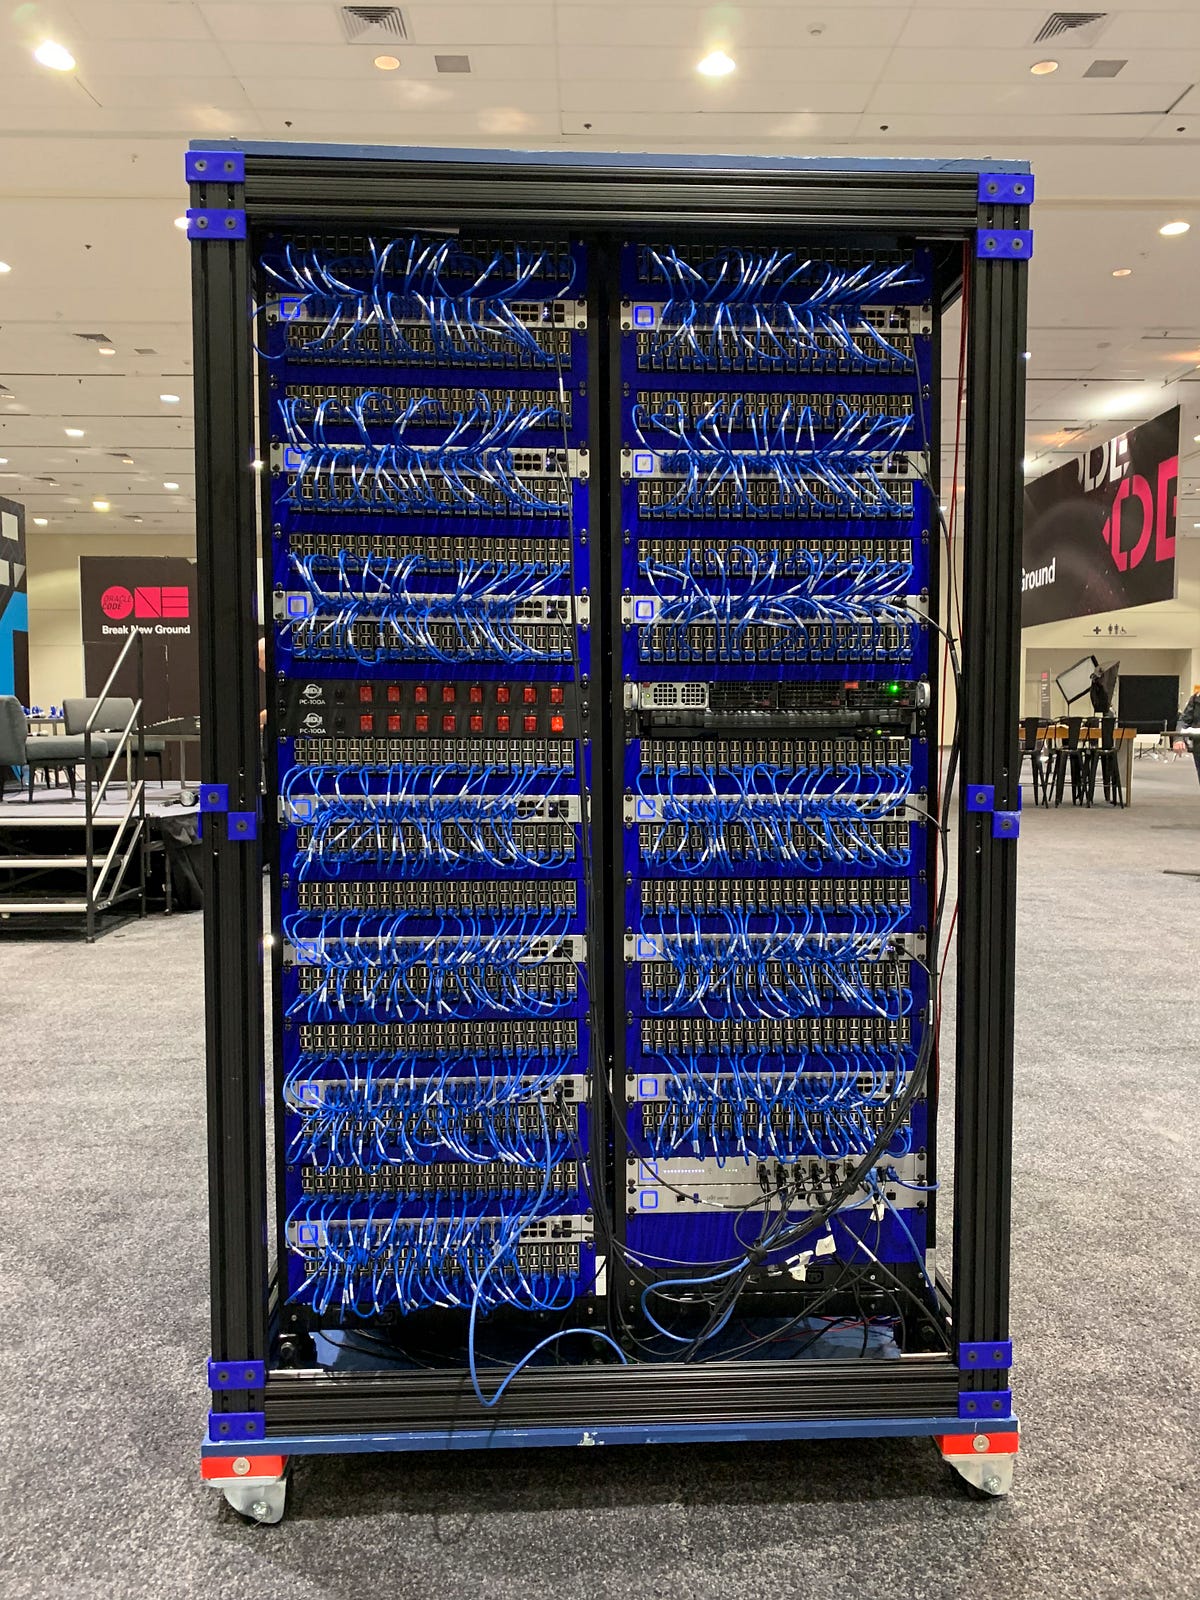 The Raspberry Pi Super Computer at Java One 2022